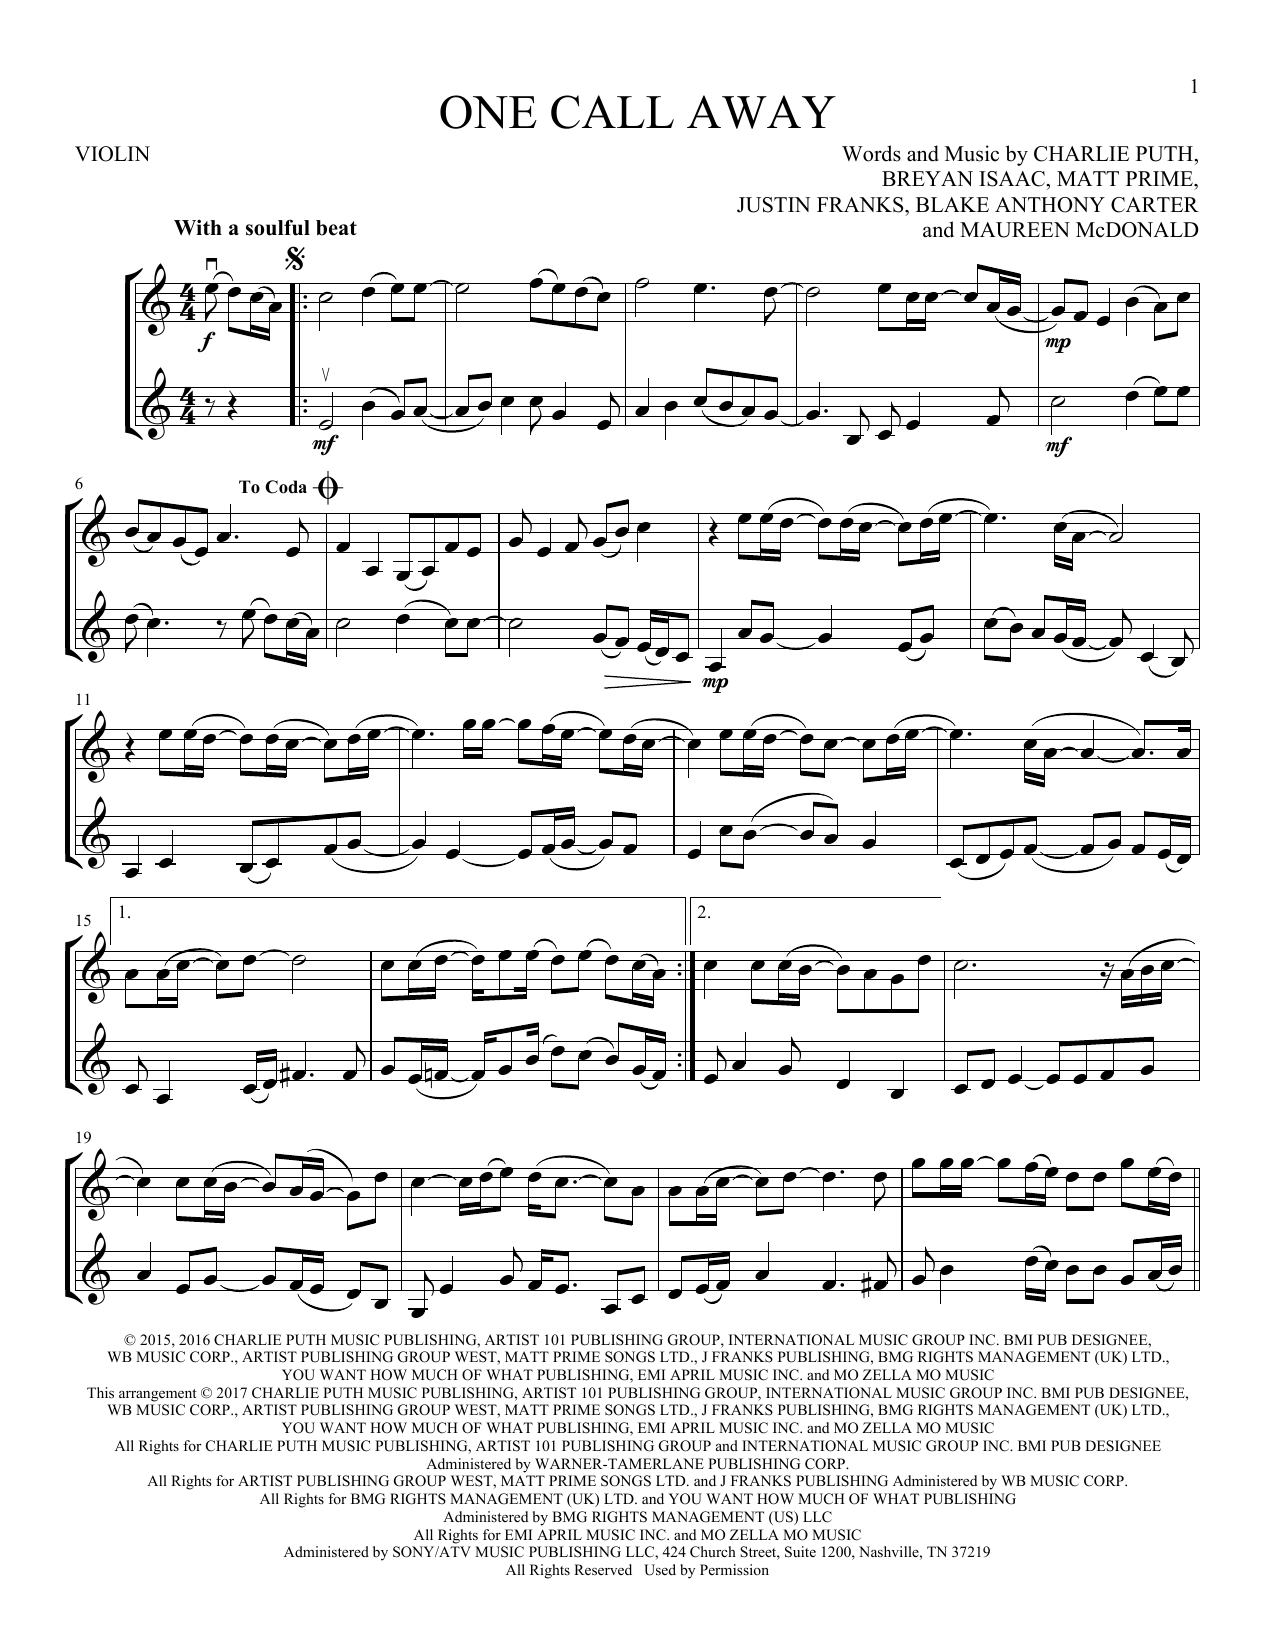 Download Charlie Puth One Call Away Sheet Music